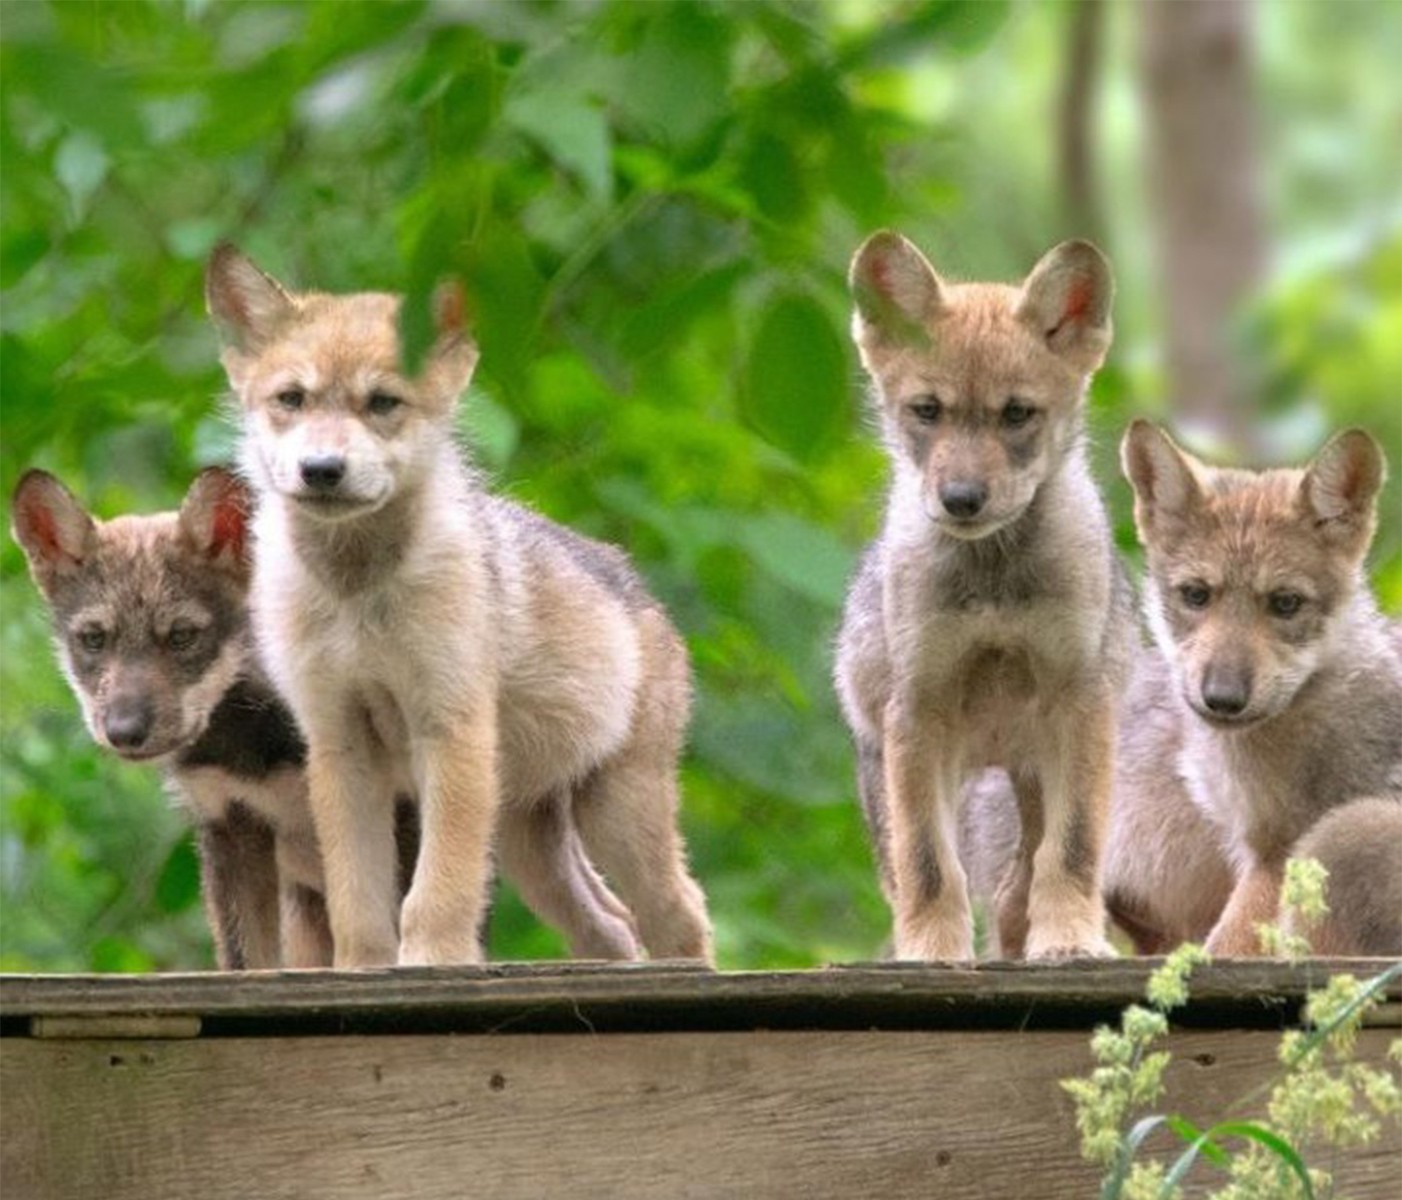 <p class="p1"><span>The <a href="https://www.endangeredwolfcenter.org/" rel="noreferrer noopener"><span>Endangered Wolf Center</span></a> in Eureka houses Mexican wolves, red wolves, maned wolves, as well as swift foxes, African painted dogs, and fennec foxes, all of which you’ll get a chance to see up close and personal through a tour of the facilities. The organization’s mission is to preserve and protect the wild canid species “with purpose and passion, through carefully managed breeding, reintroduction and inspiring education programs.”</span></p><p class="p3"><span><a href="https://www.instagram.com/p/B3M17YZjrTj/" rel="noreferrer noopener">See photo on Instagram</a></span></p>